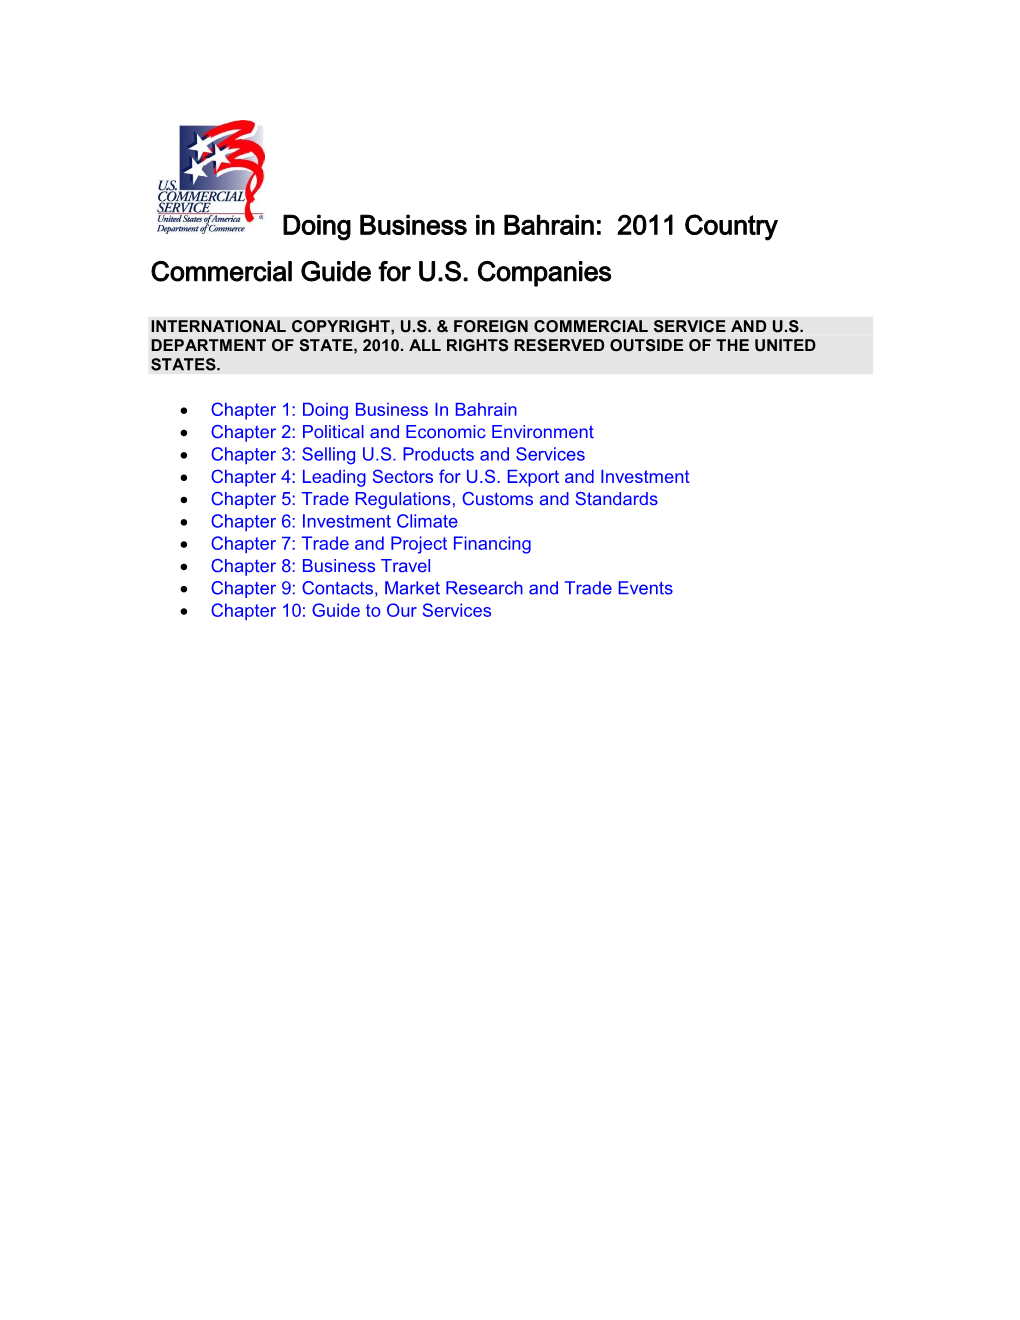 Bahrain: 2011 Country Commercial Guide for U.S